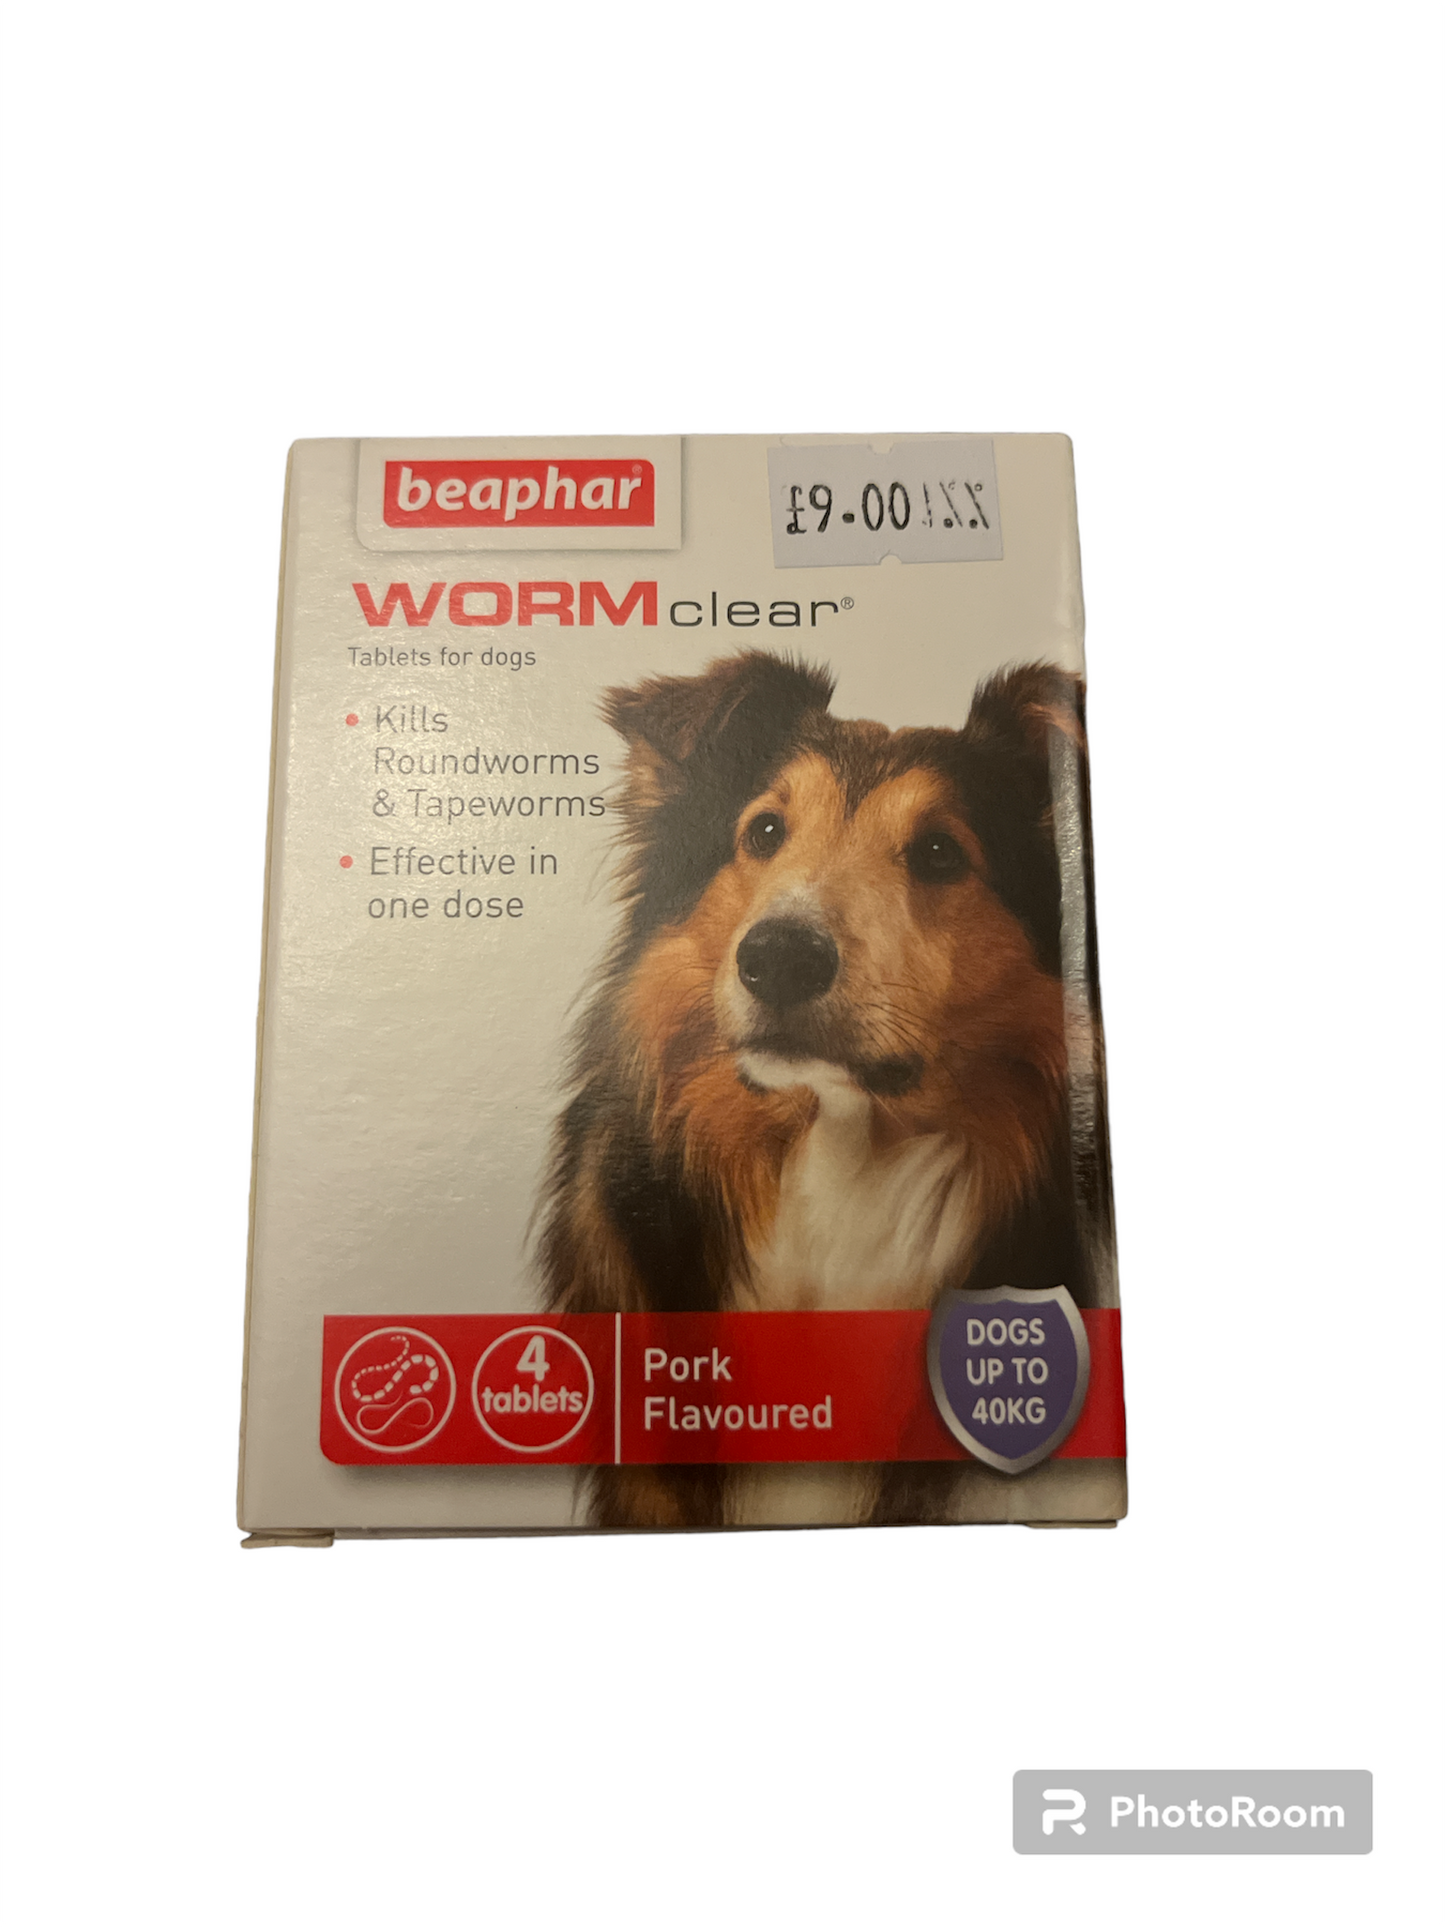 Beaphar Worm clear Dogs up to 40kg